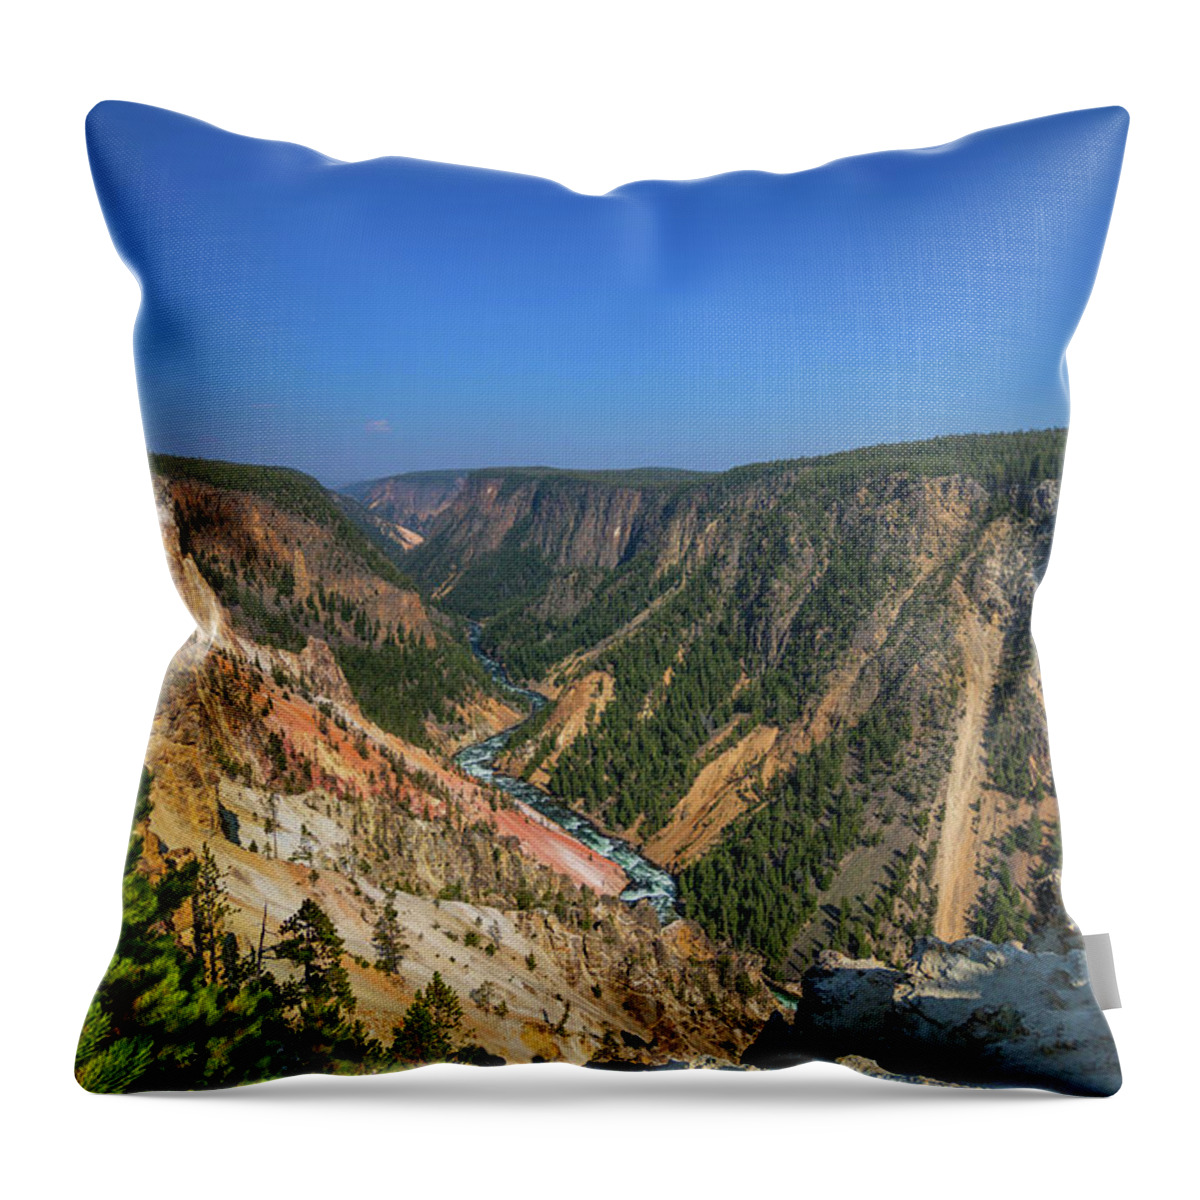 Yellowstone River Throw Pillow featuring the photograph Yellowstone No. 38 by Marisa Geraghty Photography